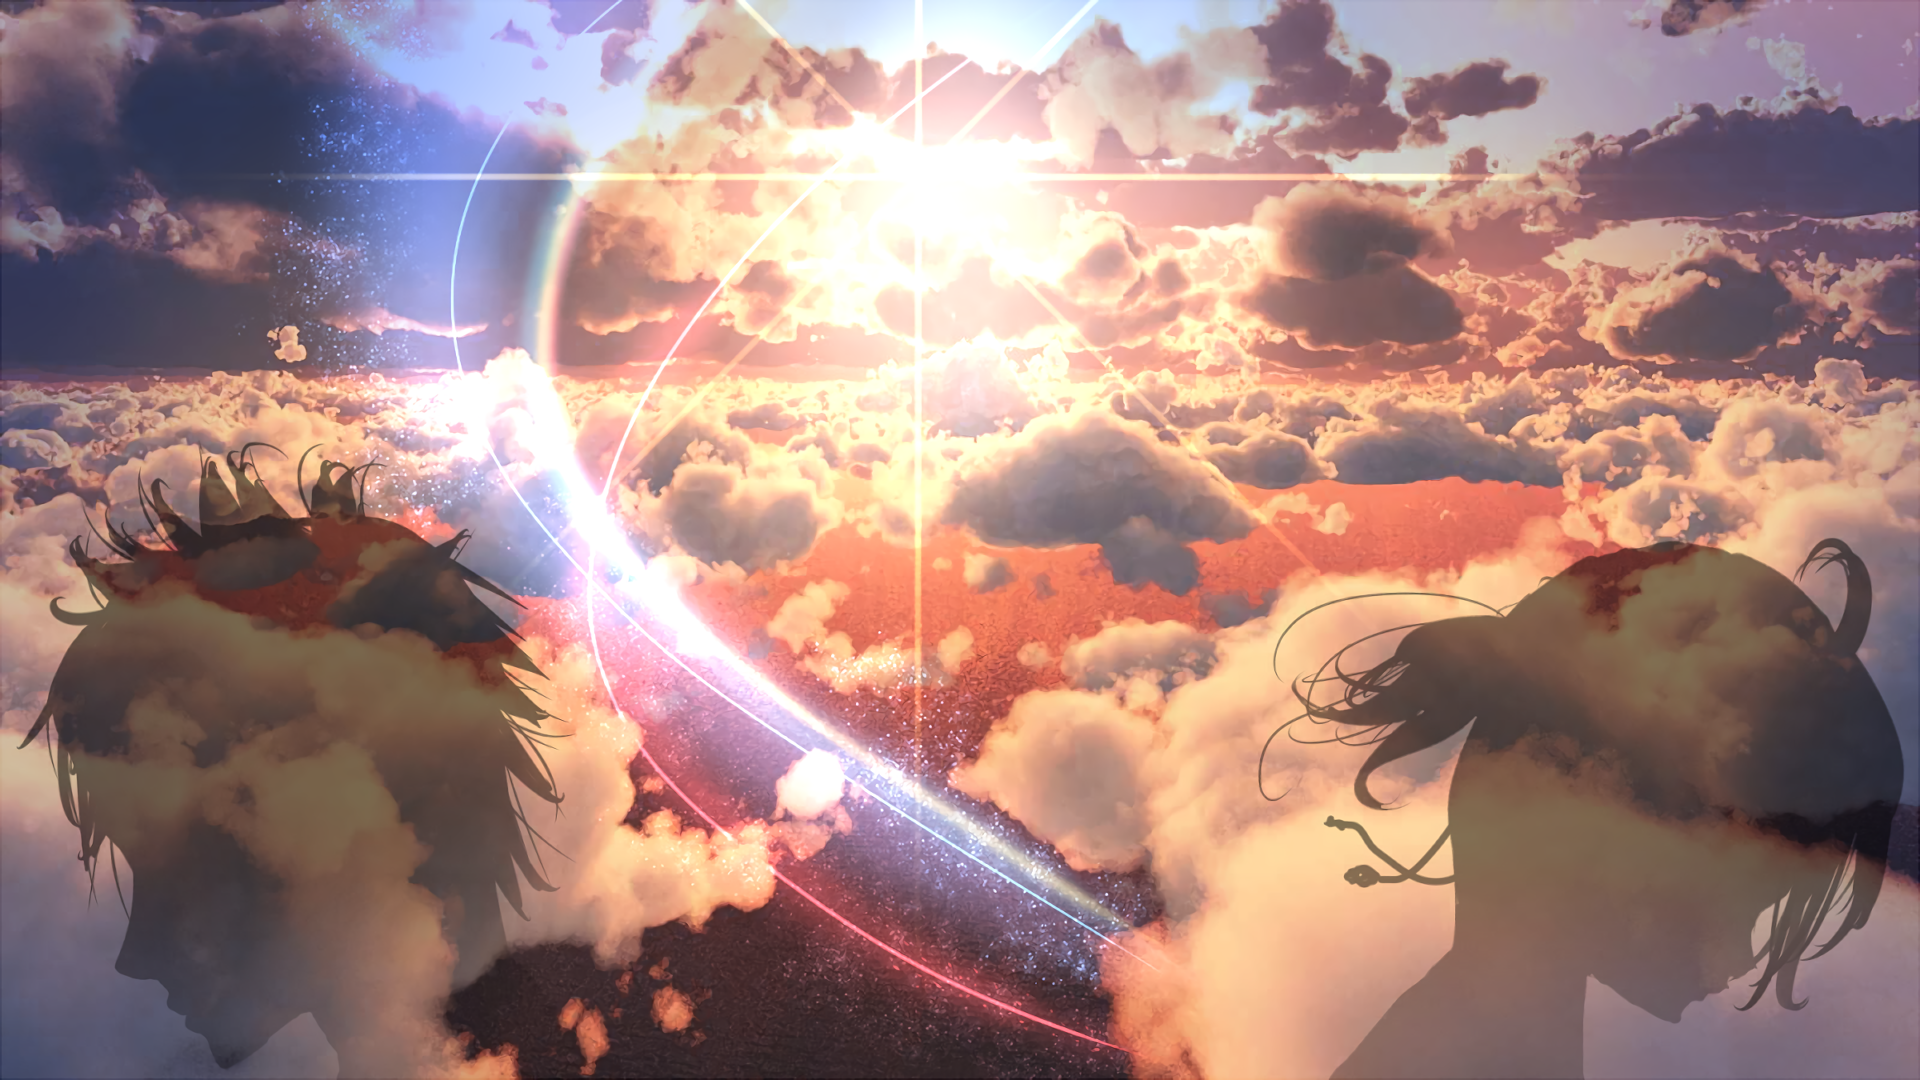 Your Name Wallpaper Pc / your name 4k wallpaper (3840x2160) (มีรูปภาพ